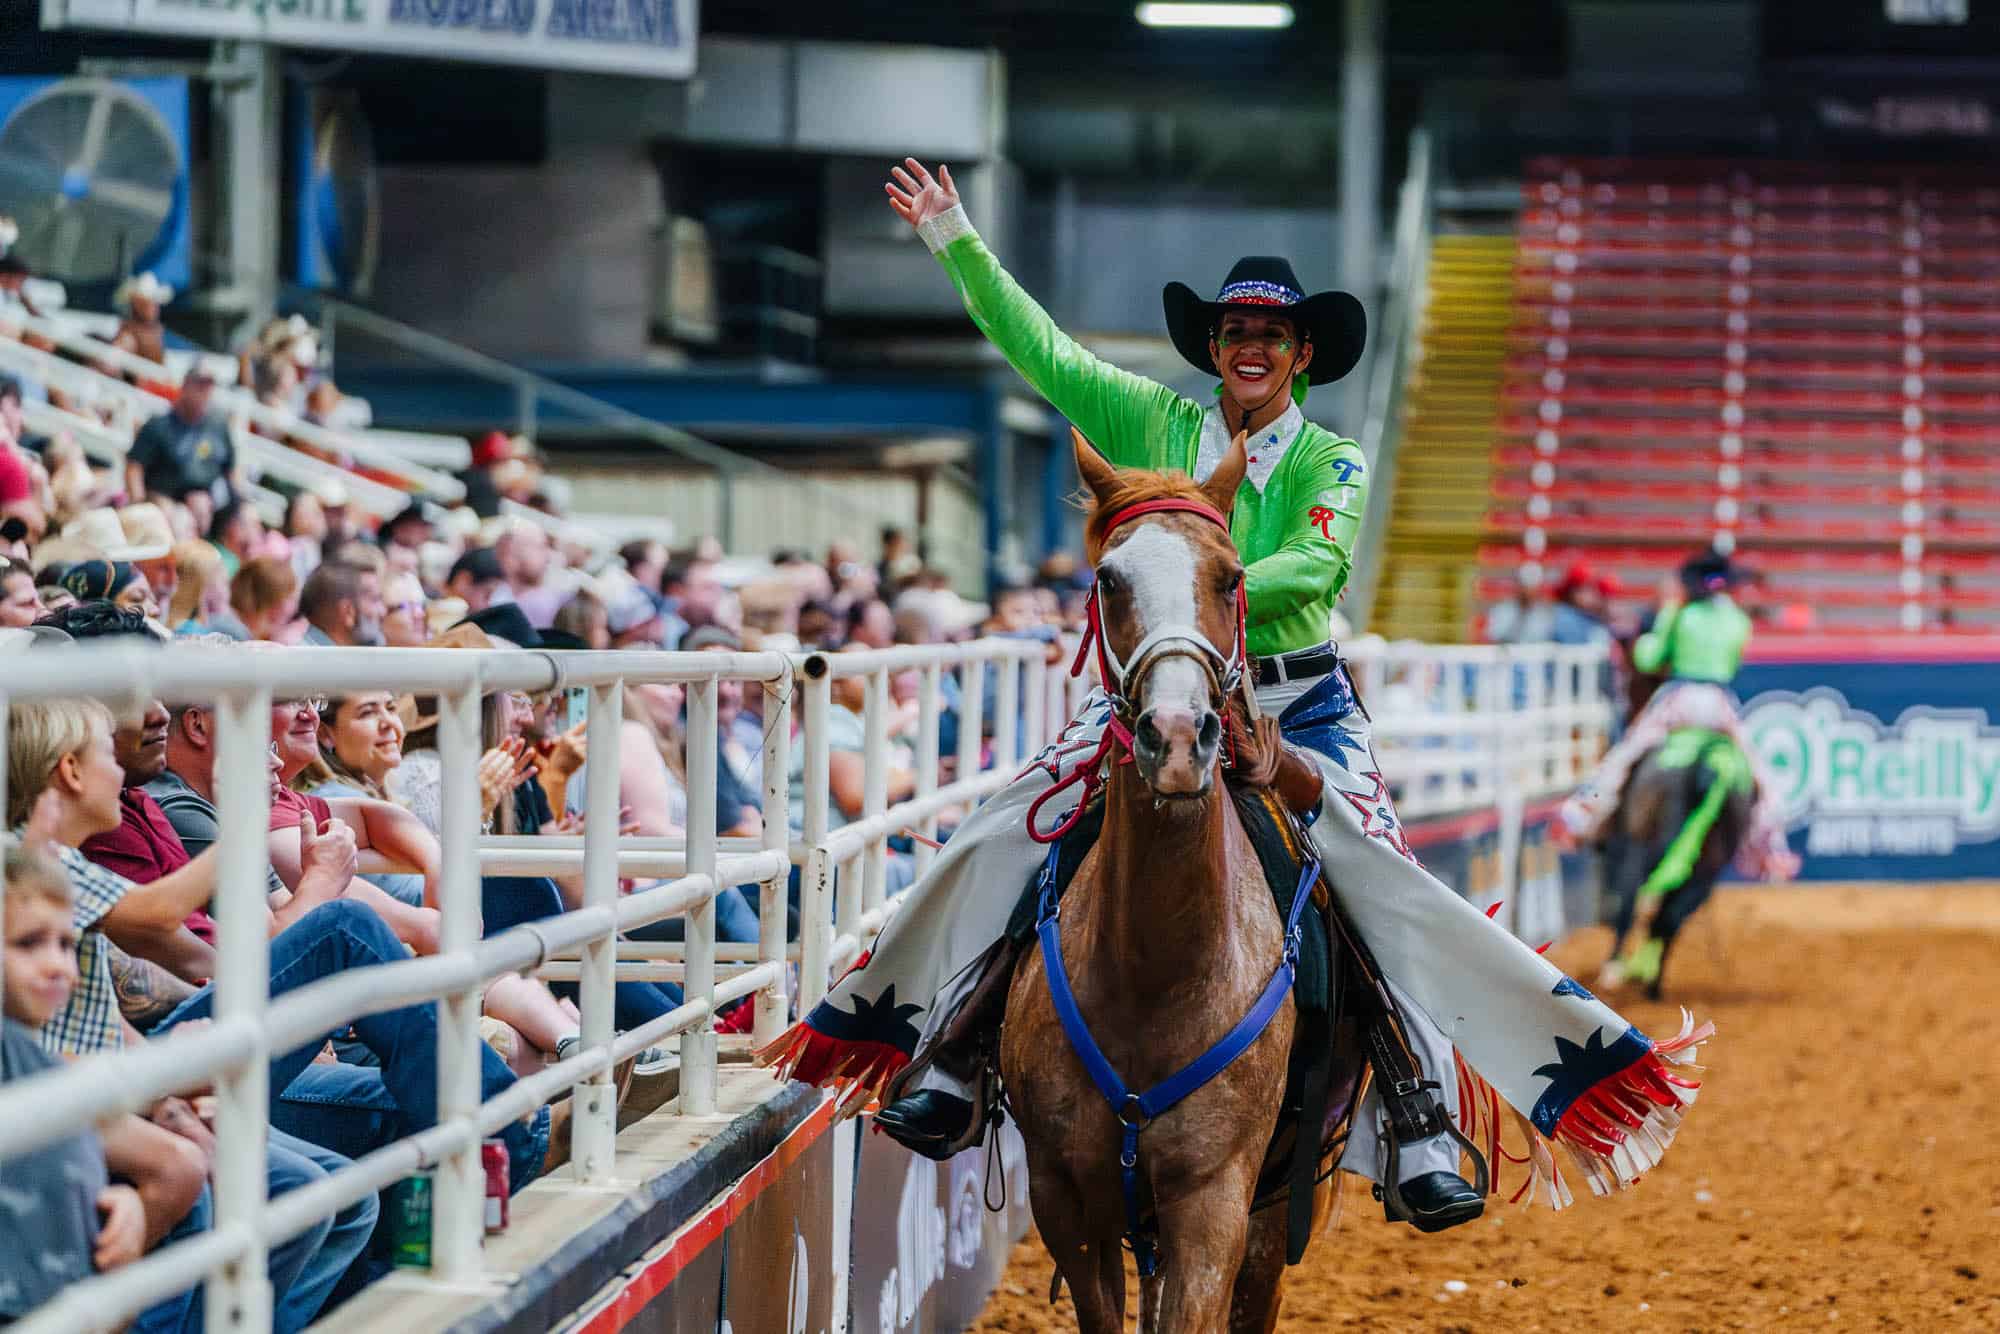 A woman riding a horse in a rodeo arena.